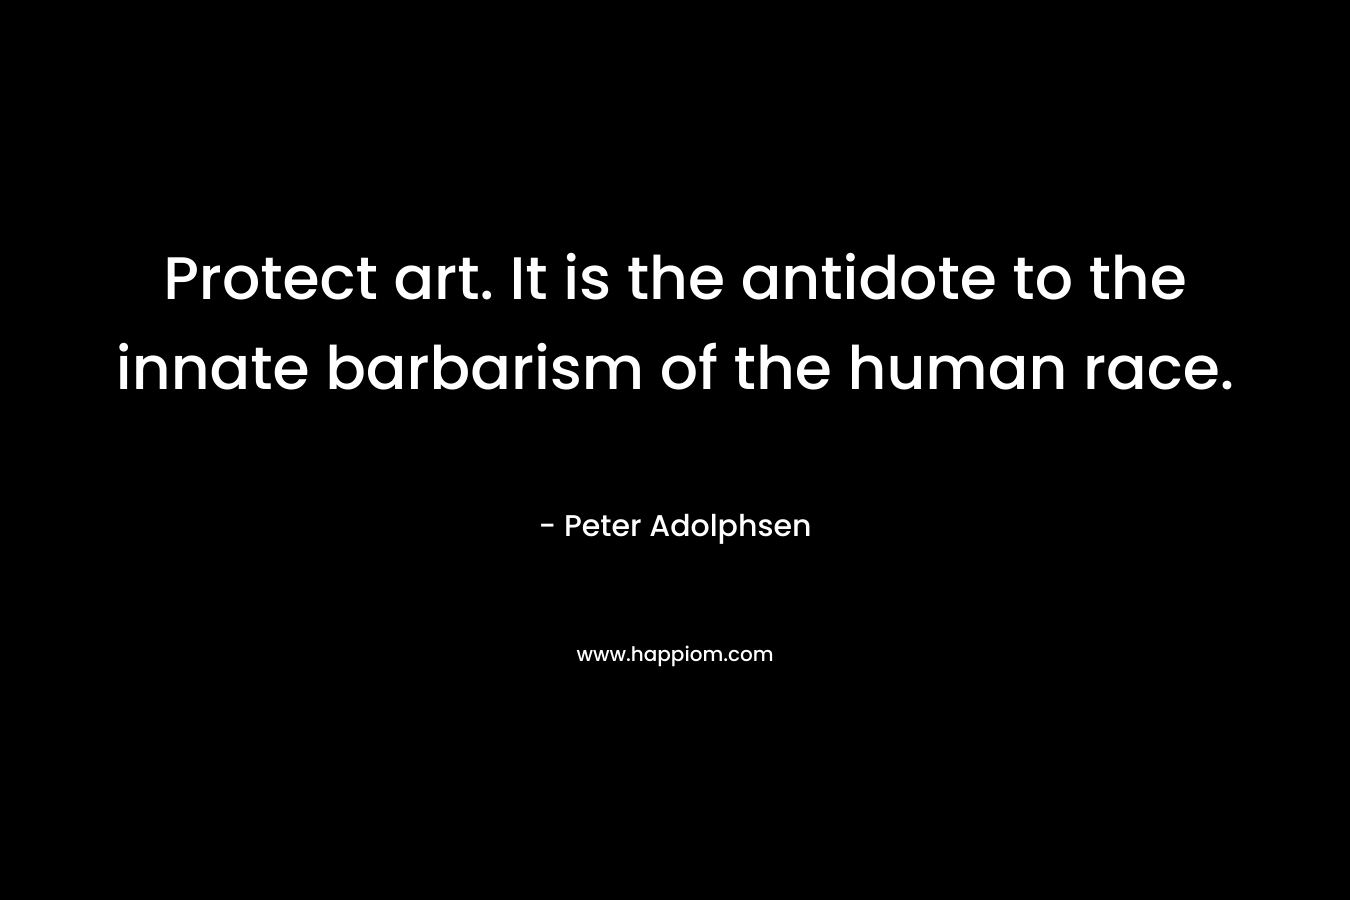 Protect art. It is the antidote to the innate barbarism of the human race.